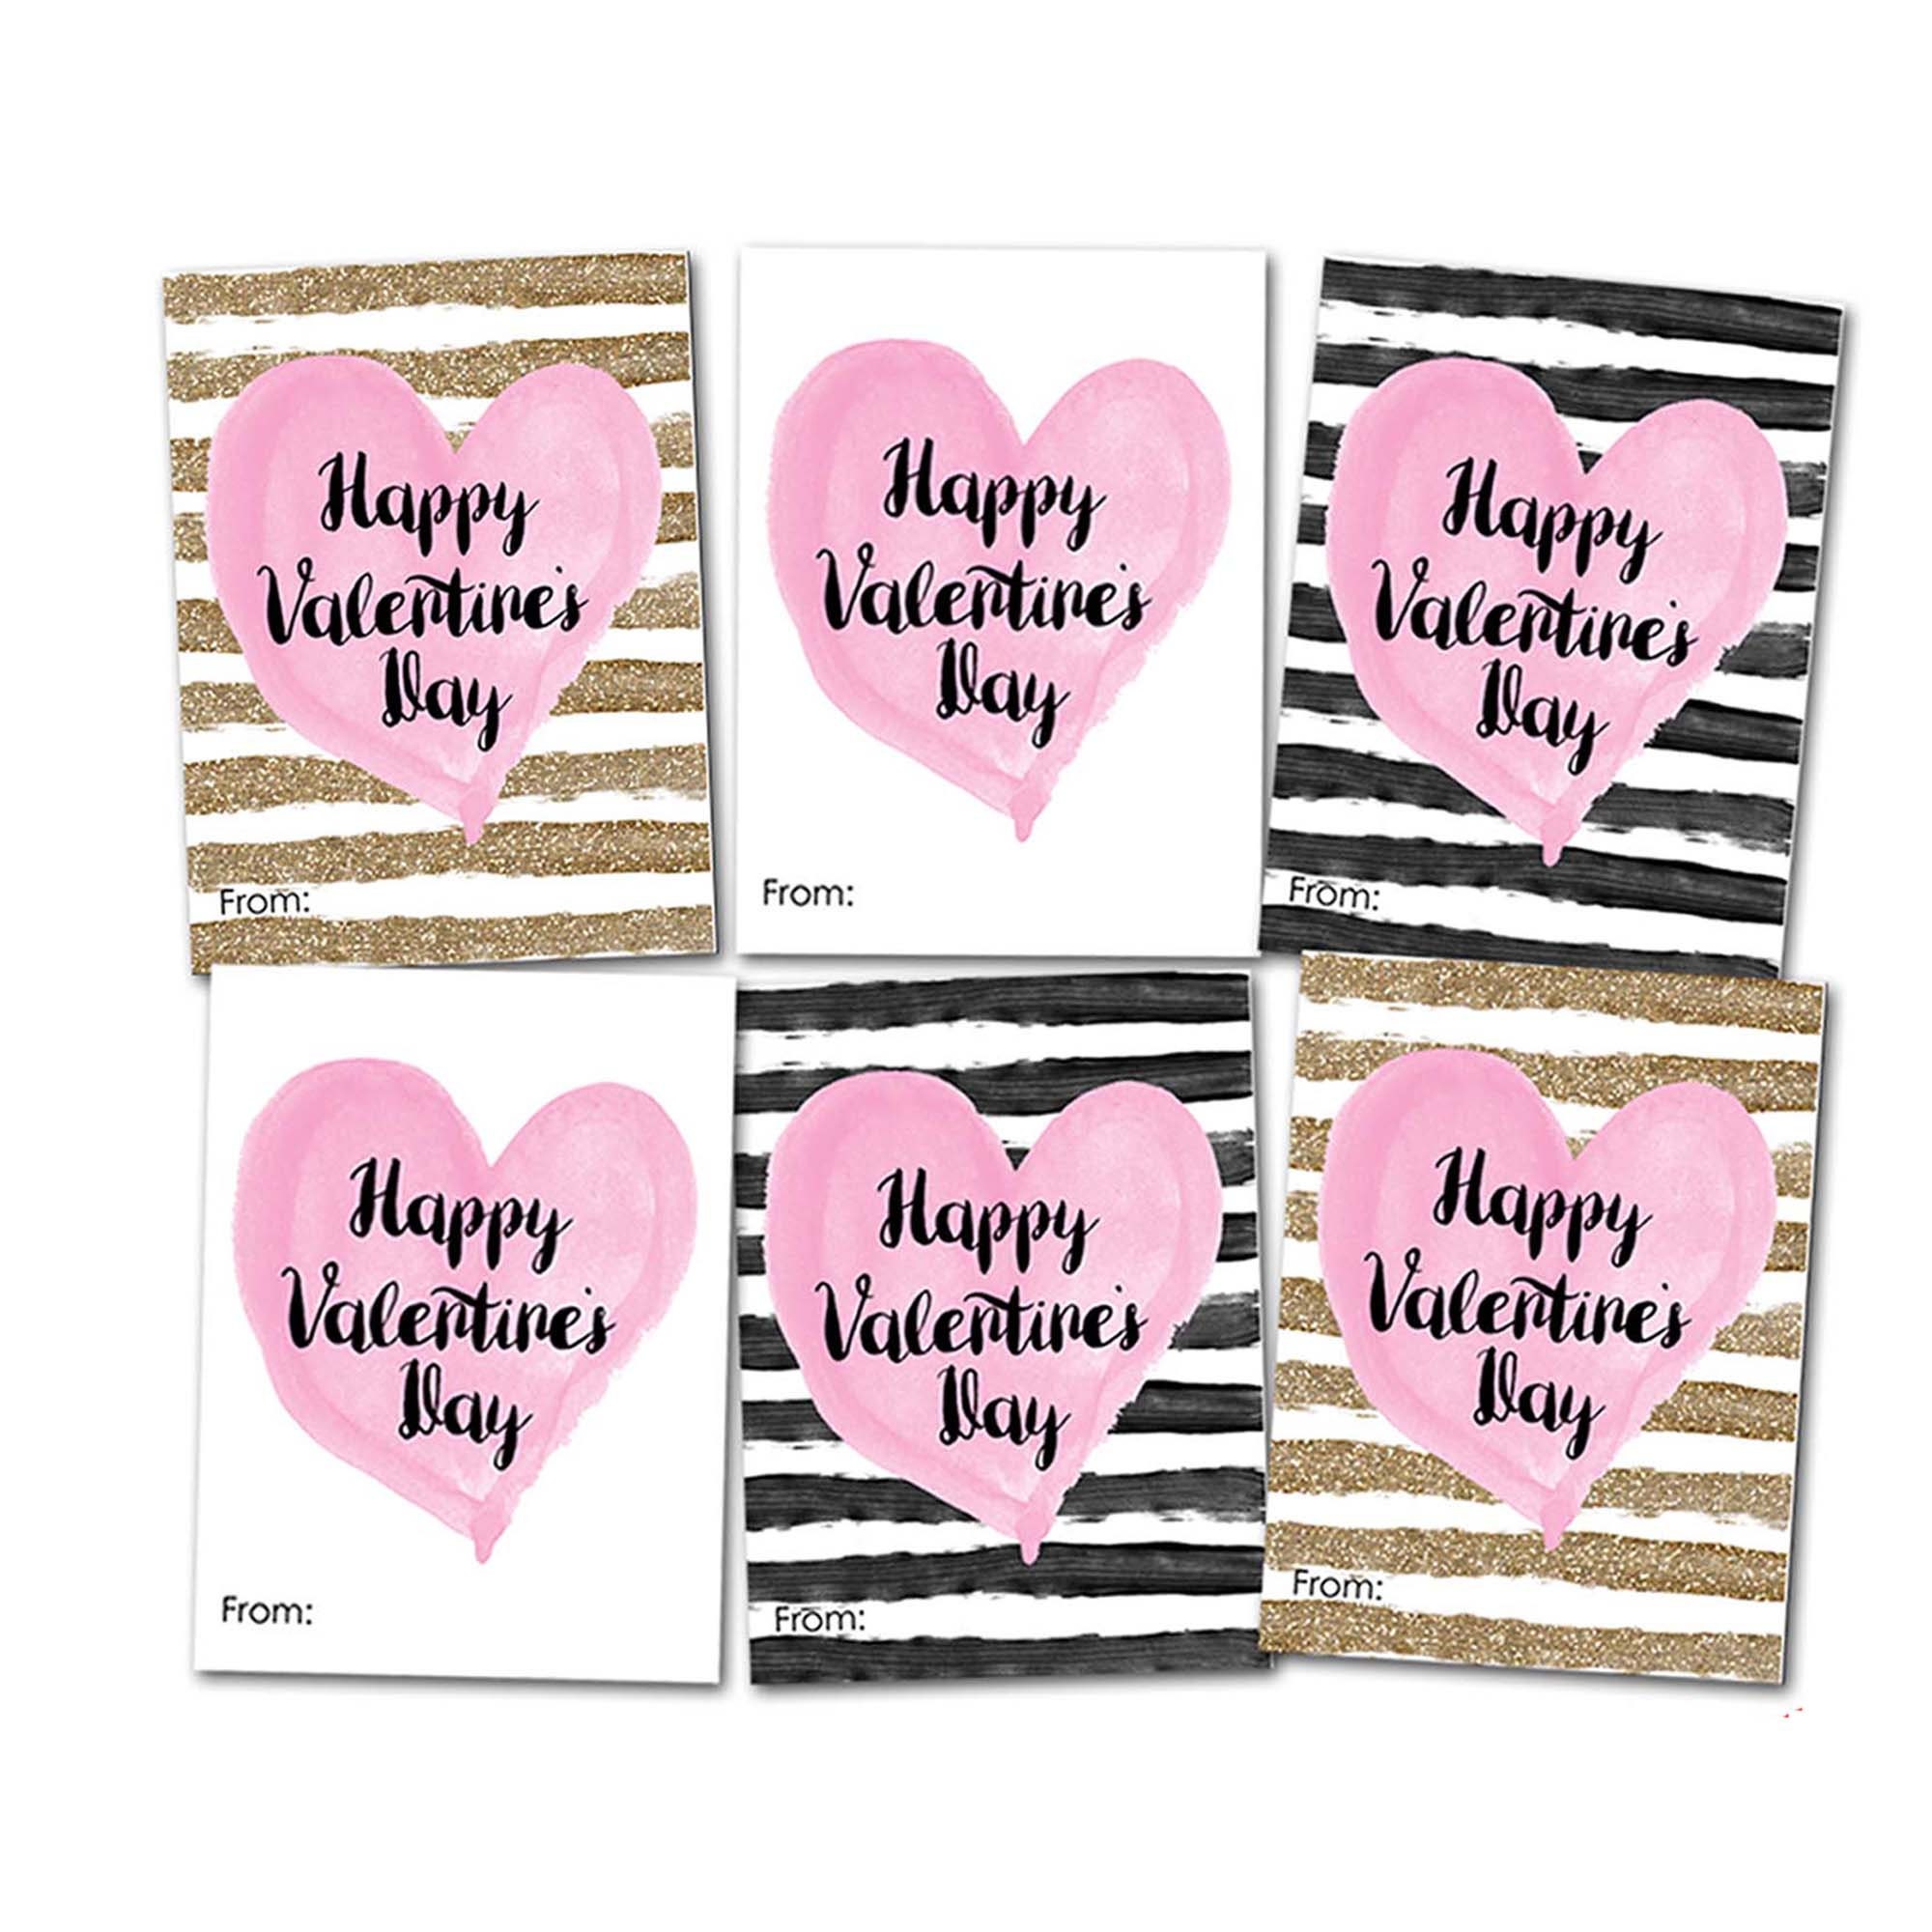 Personalized Kids Valentine Cards for School, Red Valentine's Day Cards for  Girls, Classroom Valentines, Kids Class Valentines, Red Hearts 